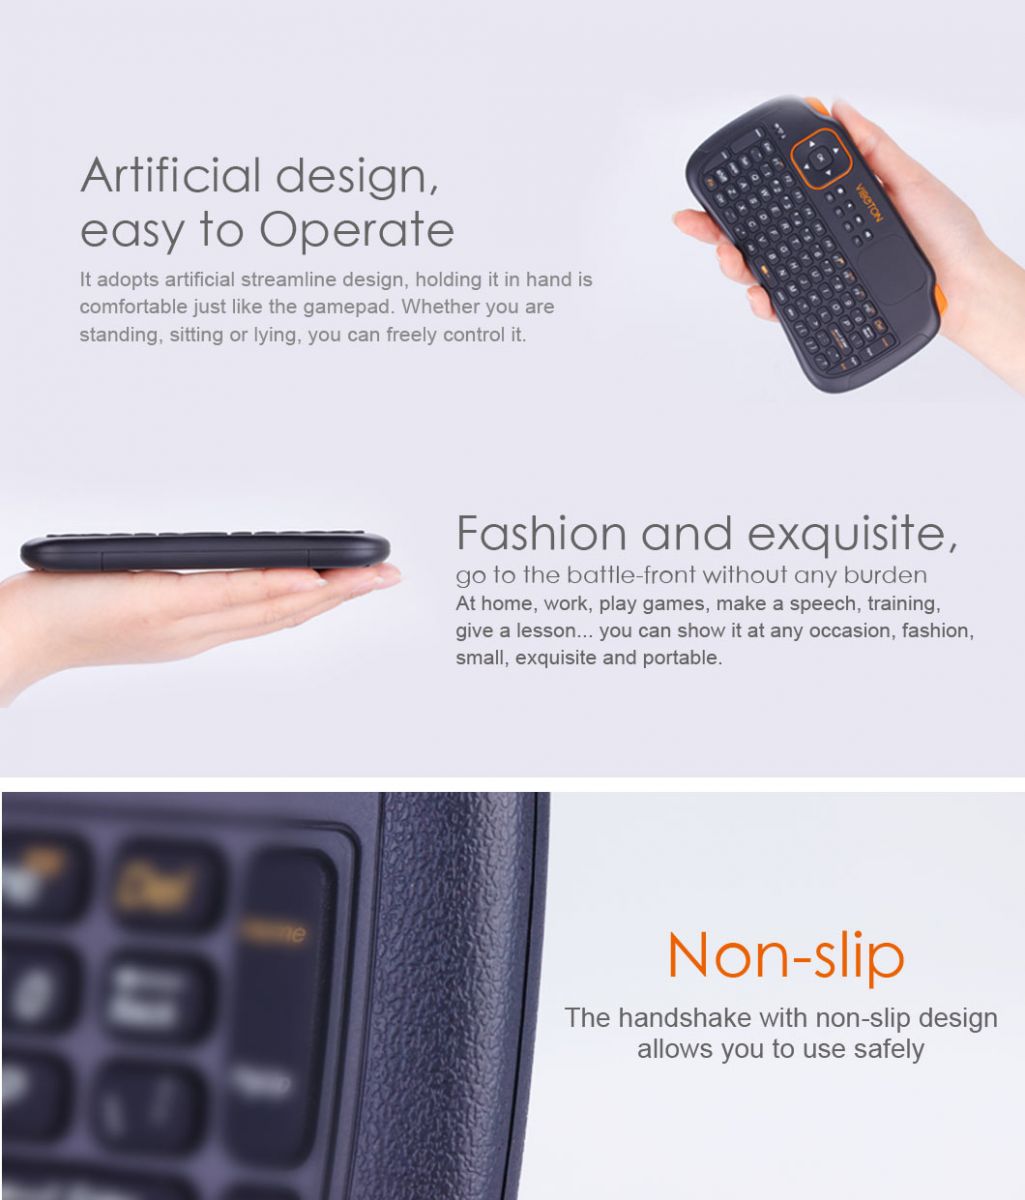 VIBOTON-S1-Mini-24GHz-Wireless-Smart-Keyboard-Air-Mouse-for-Mini-PC-Android-TV-HTPC-1006422